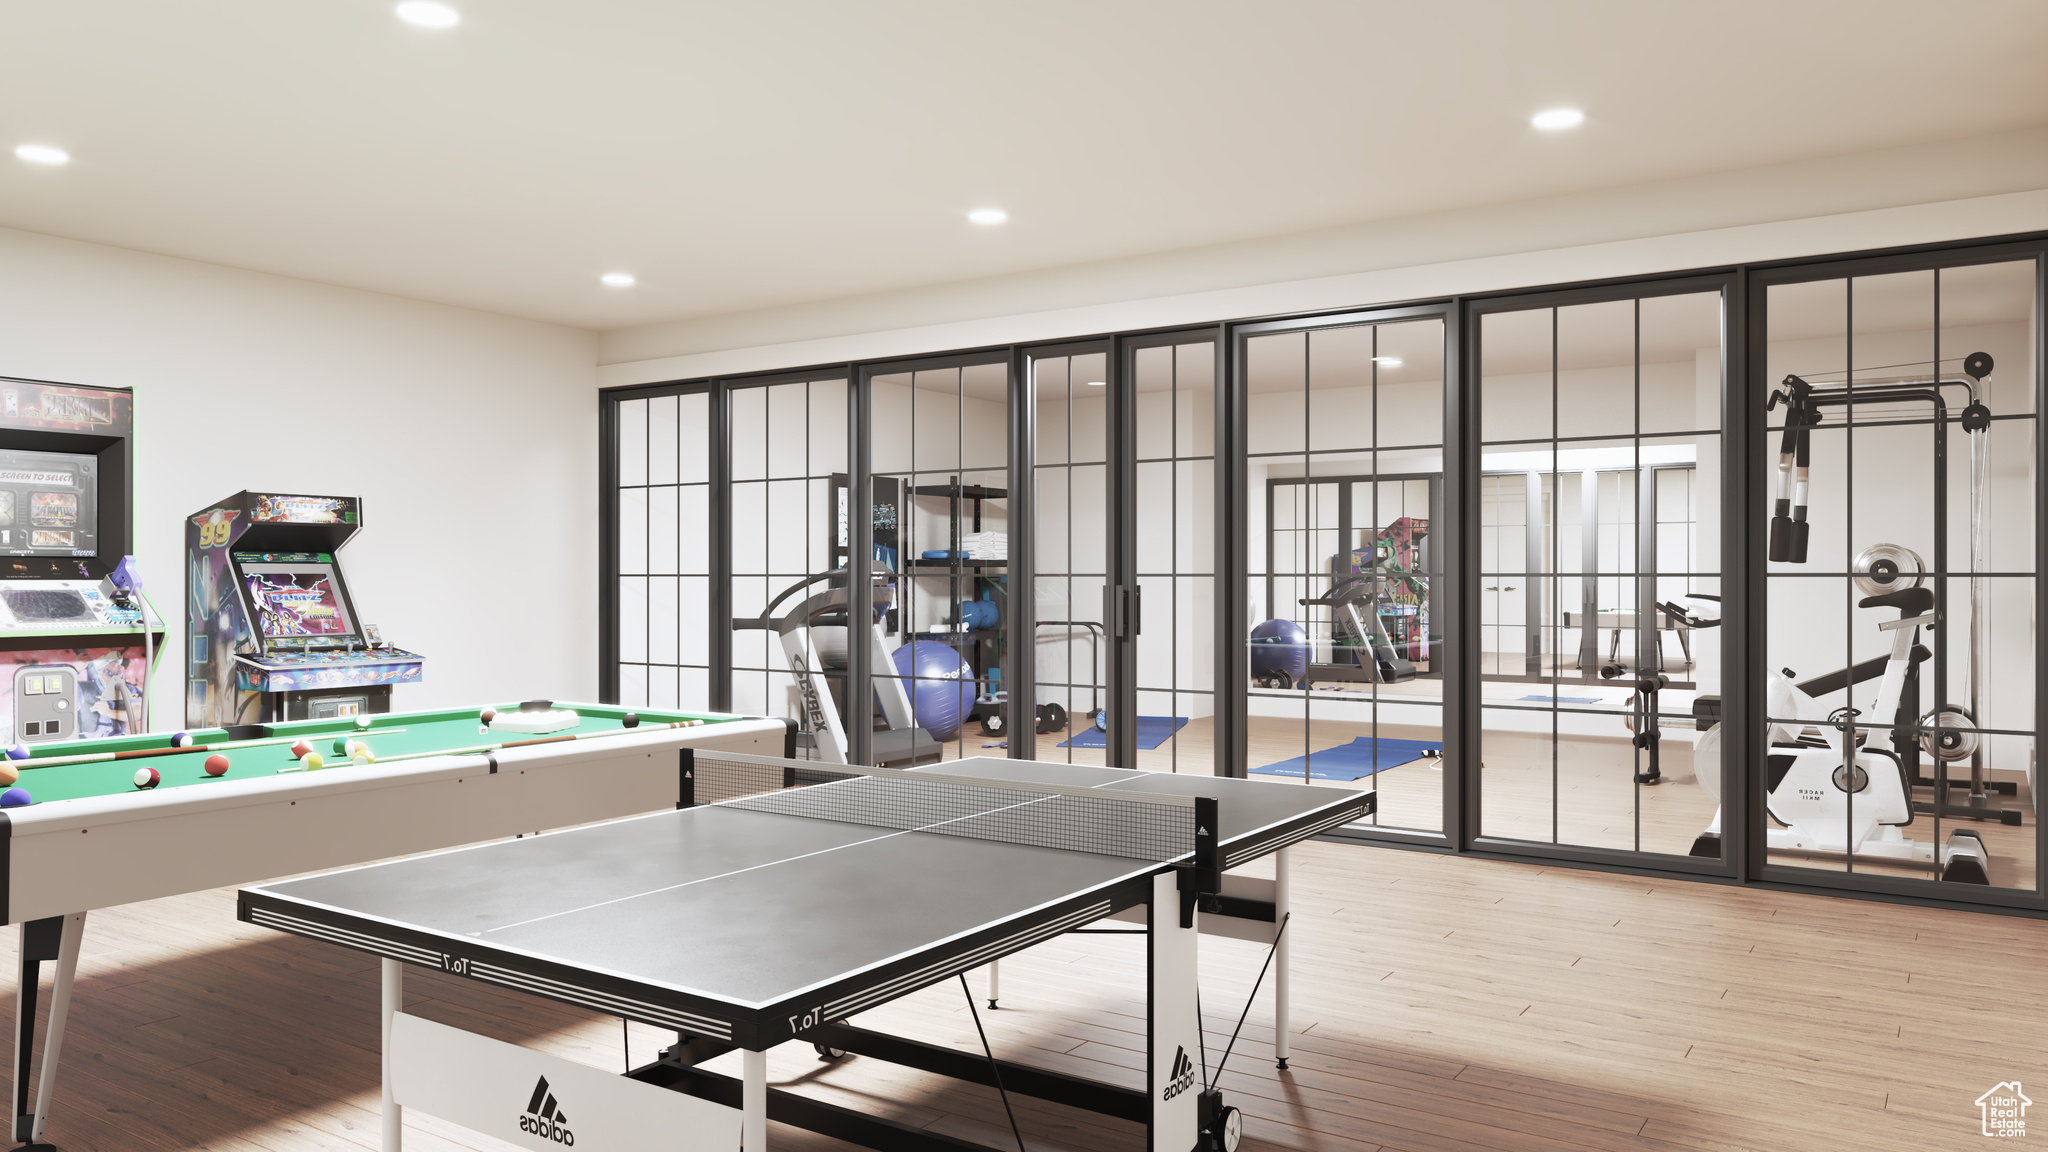 Activity room separated with glass wall to a Gym